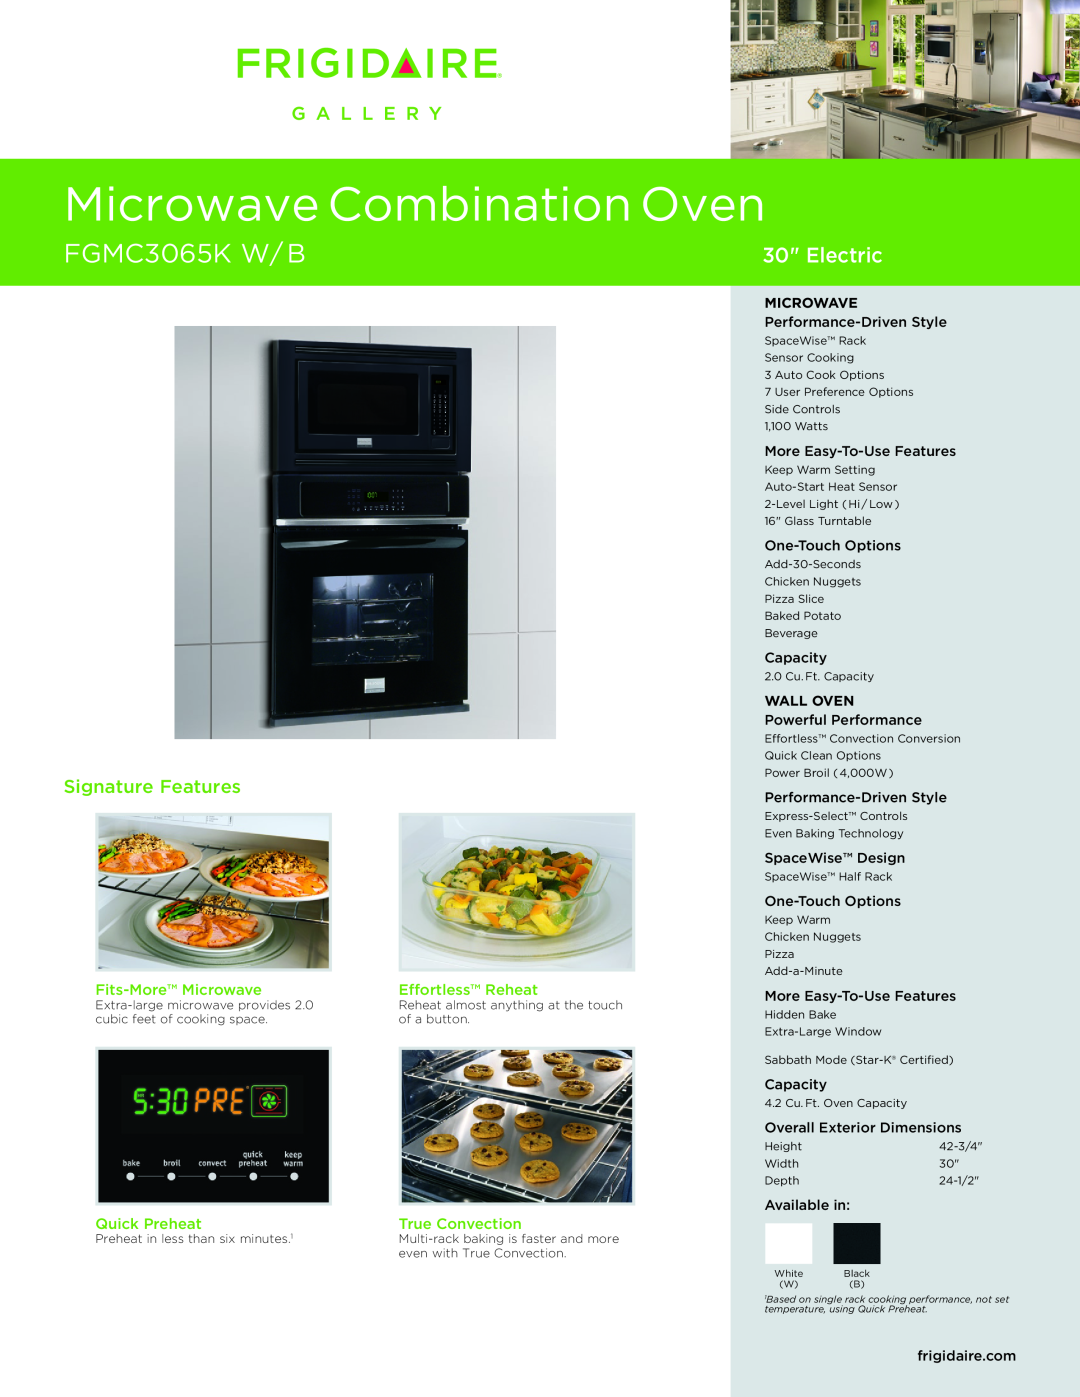 Frigidaire FGMC3065KW dimensions Fits-MoreMicrowave, Effortless Reheat, Quick Preheat, True Convection, FGMC3065K W/ B 